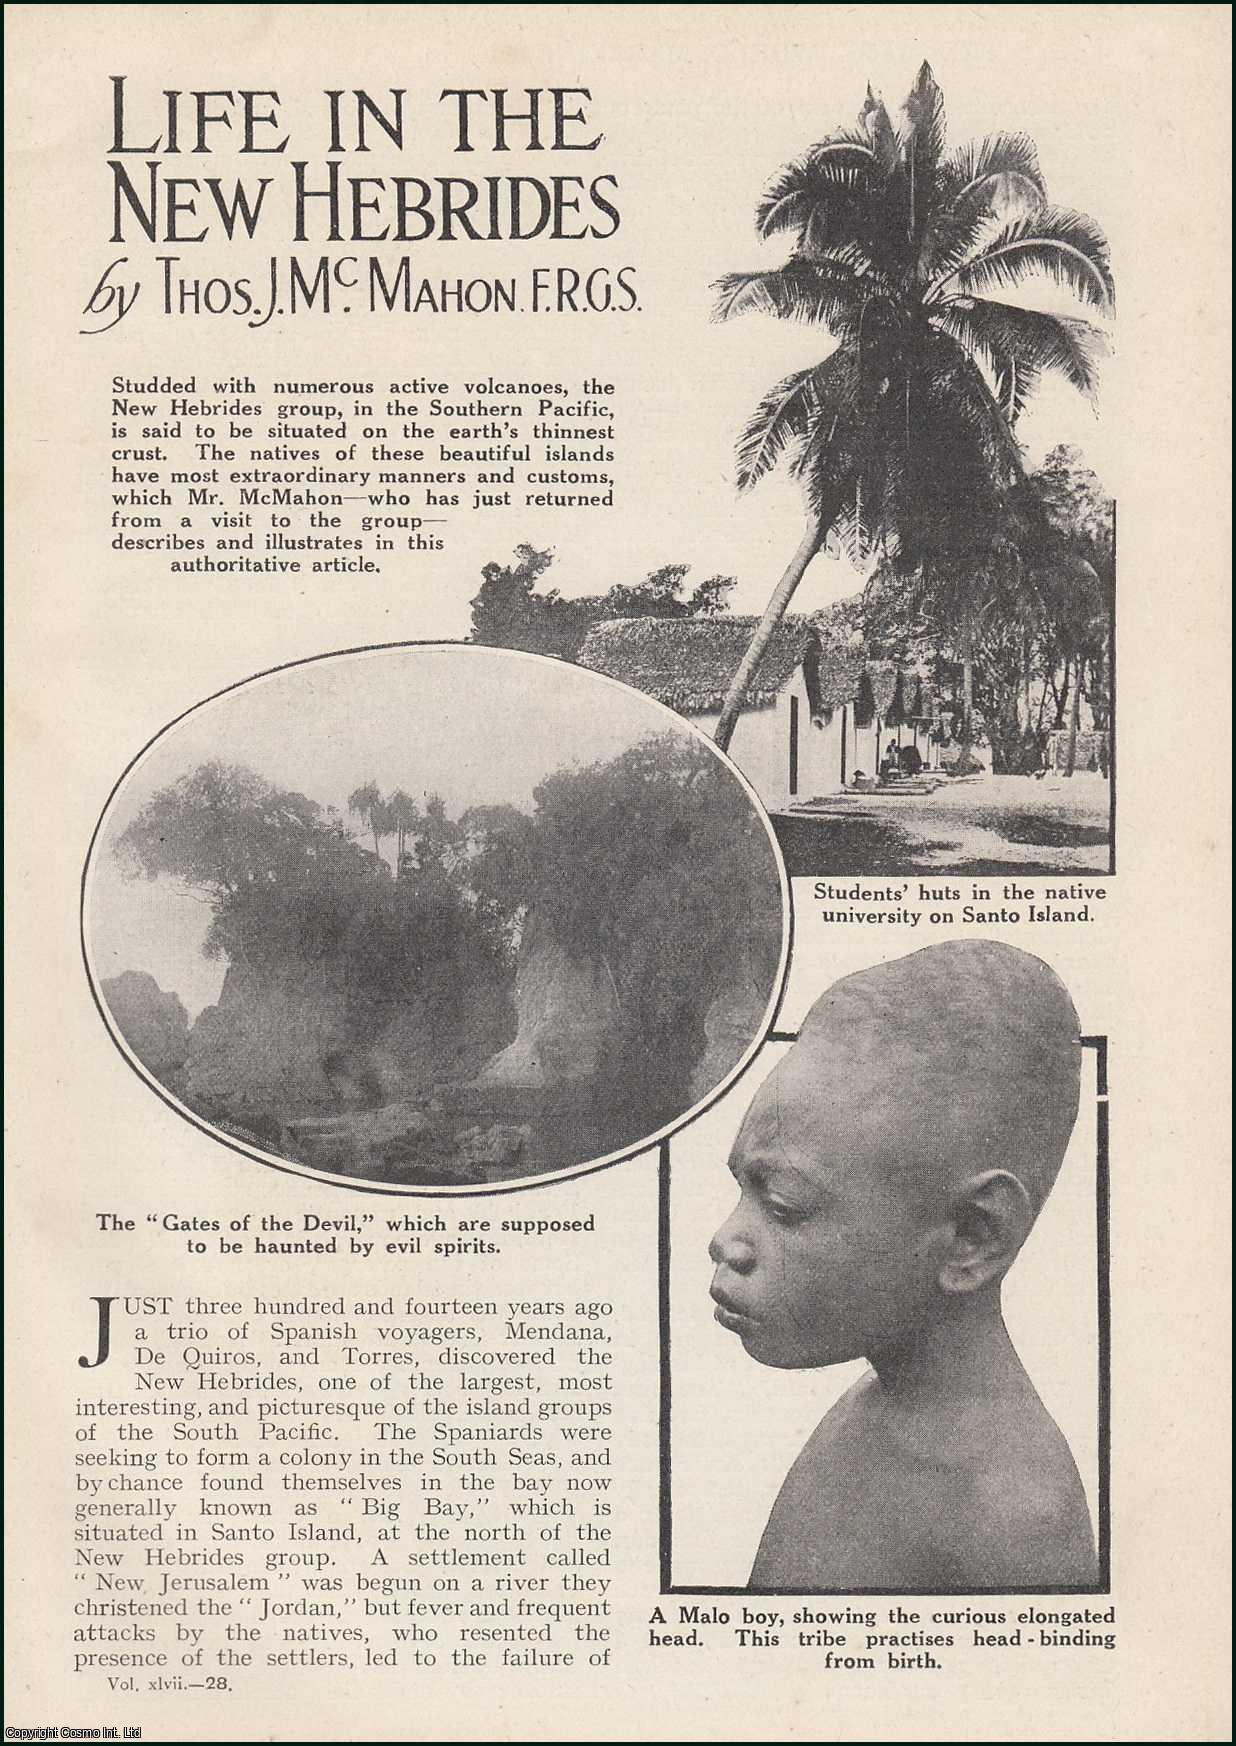 Thomas J. McMahon F.R.G.S. - Life In the New Hebrides. An uncommon original article from the Wide World Magazine, 1921.